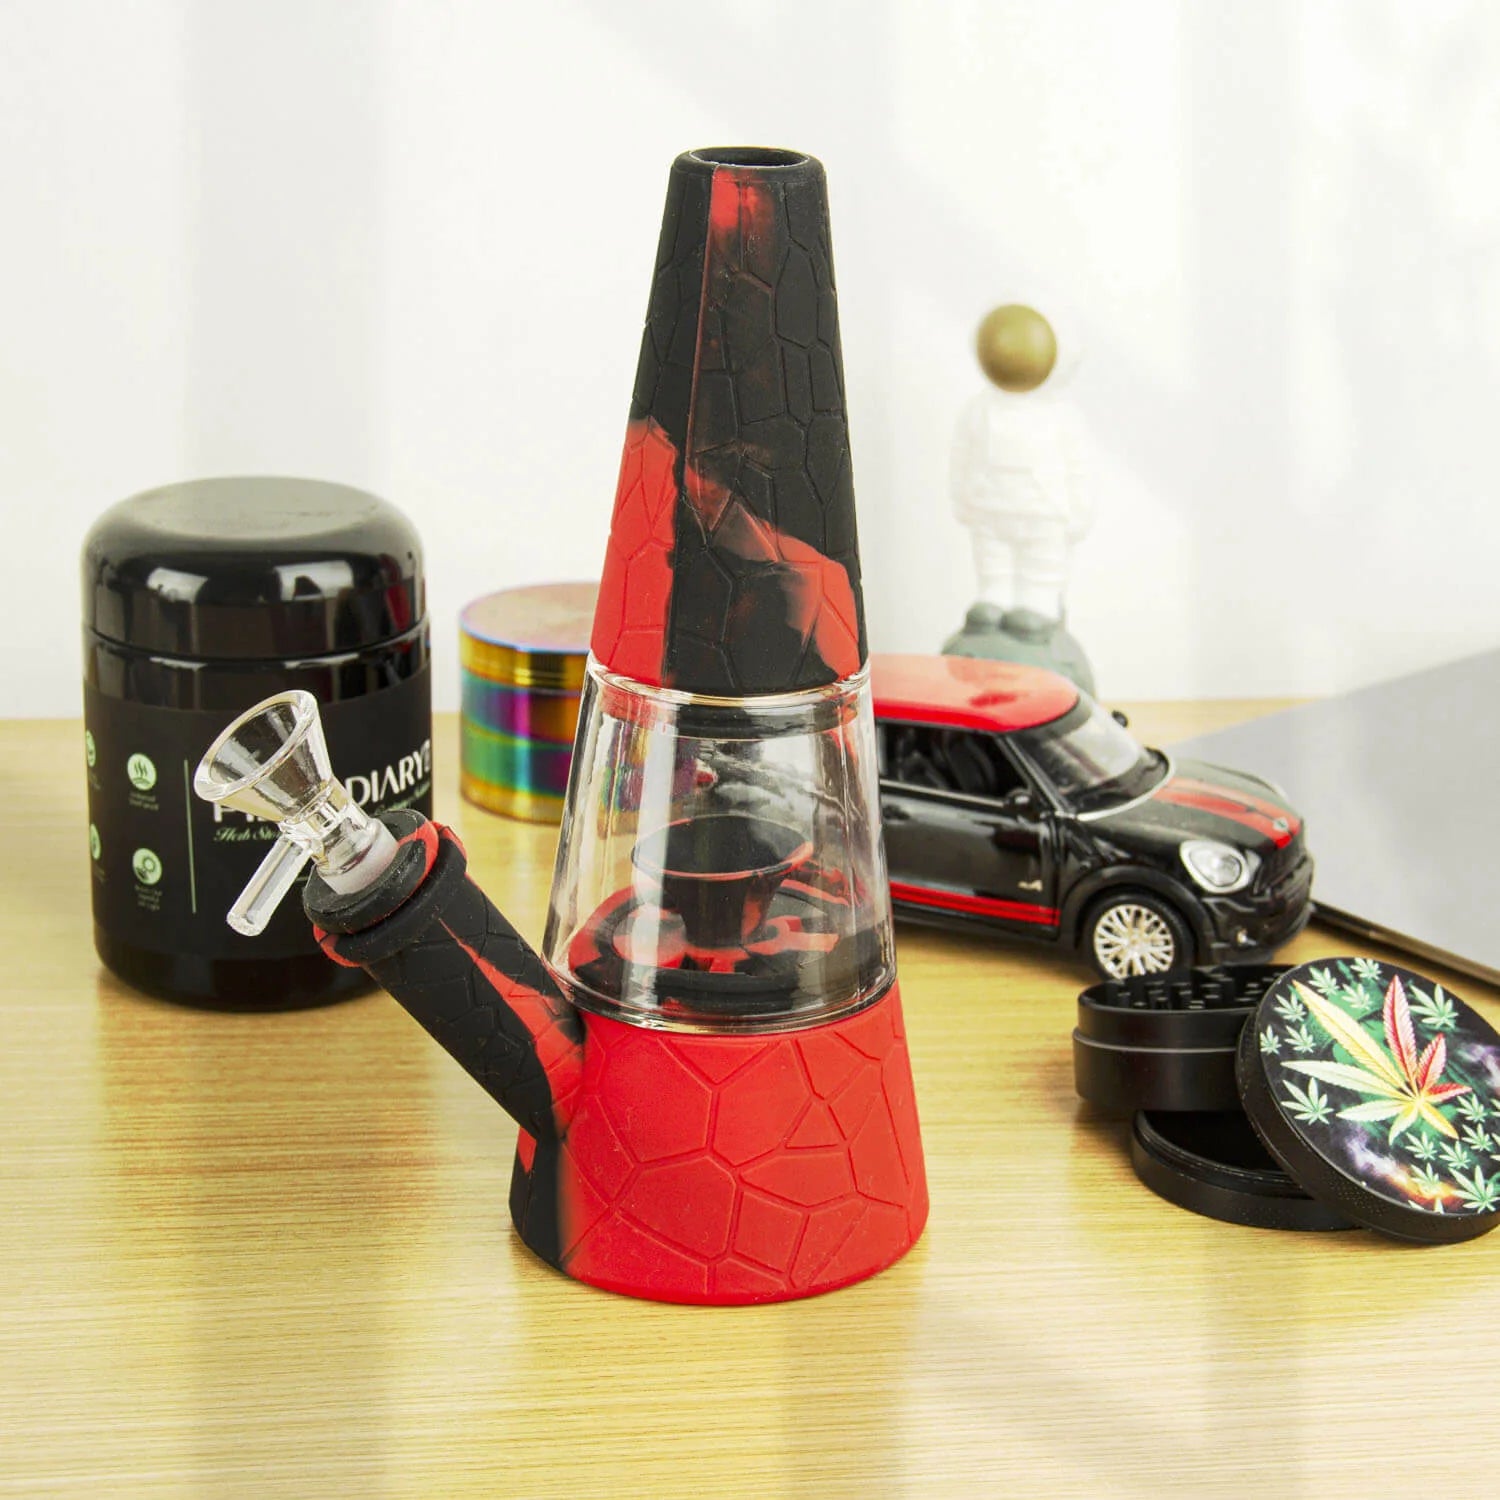 Top 8 Collapsible Bongs